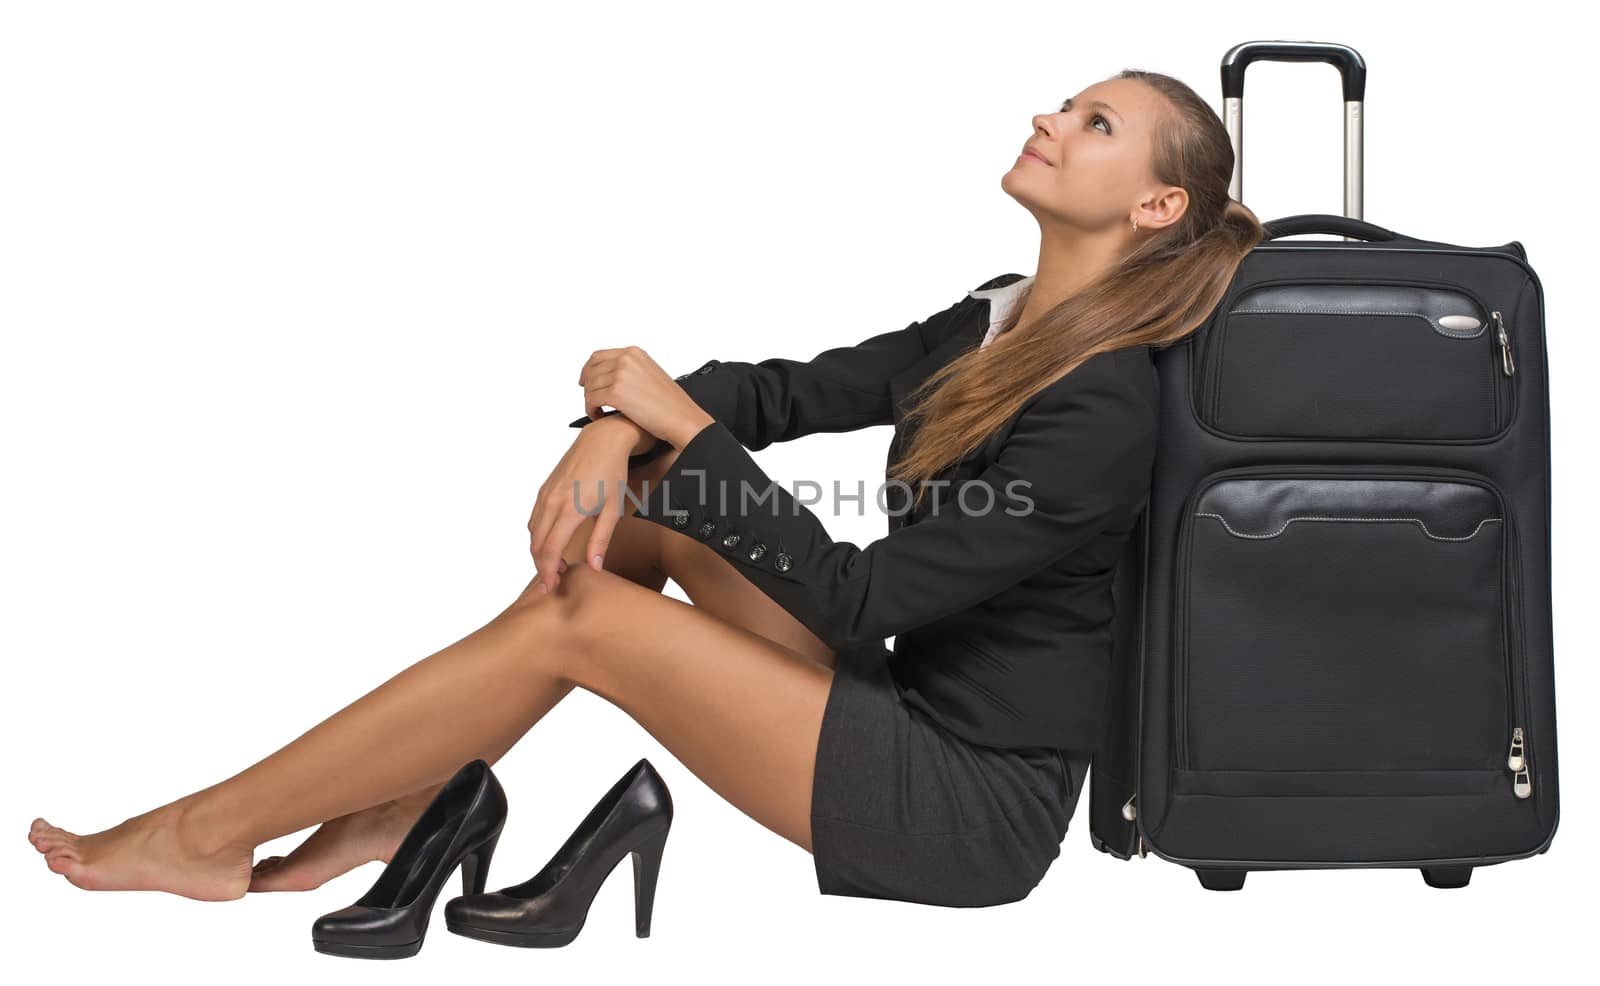 Businesswoman with her shoes off sitting next to front view suitcase with extended handle, looking upwards. Isolated over white background